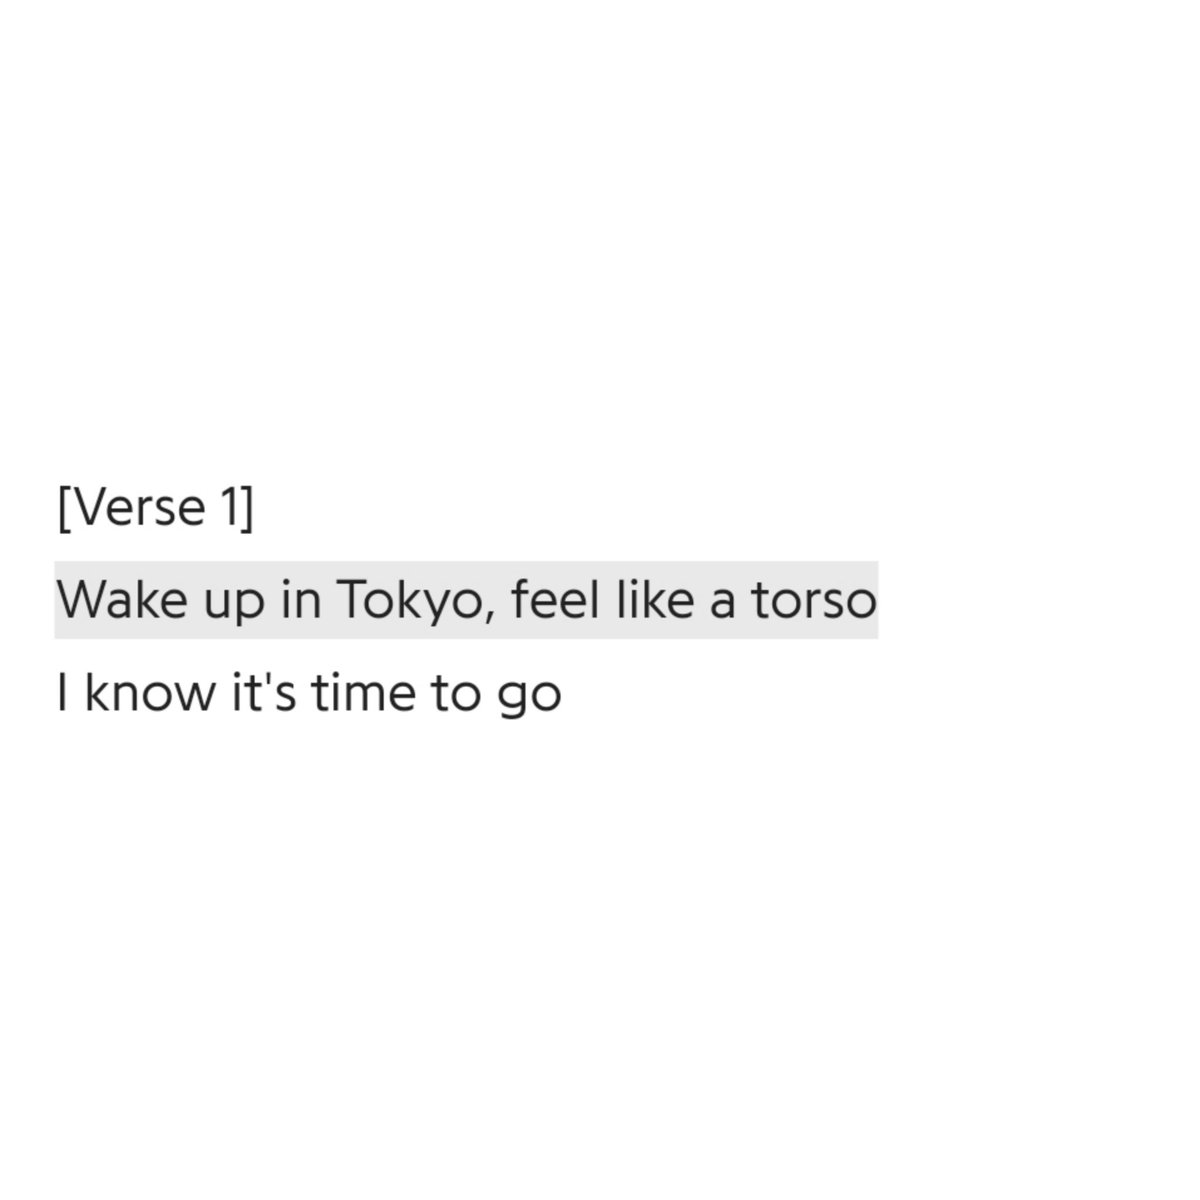 It could be perpetual night for a "torn soul".'Wake up in Tokyo, feel like a torso" when I first heard 'tokyo' I misheard "torso" for "torn soul", the second time it was "tourist" before finally hearing "torso" n I realized what an amazing n extremely clever auditory effect+